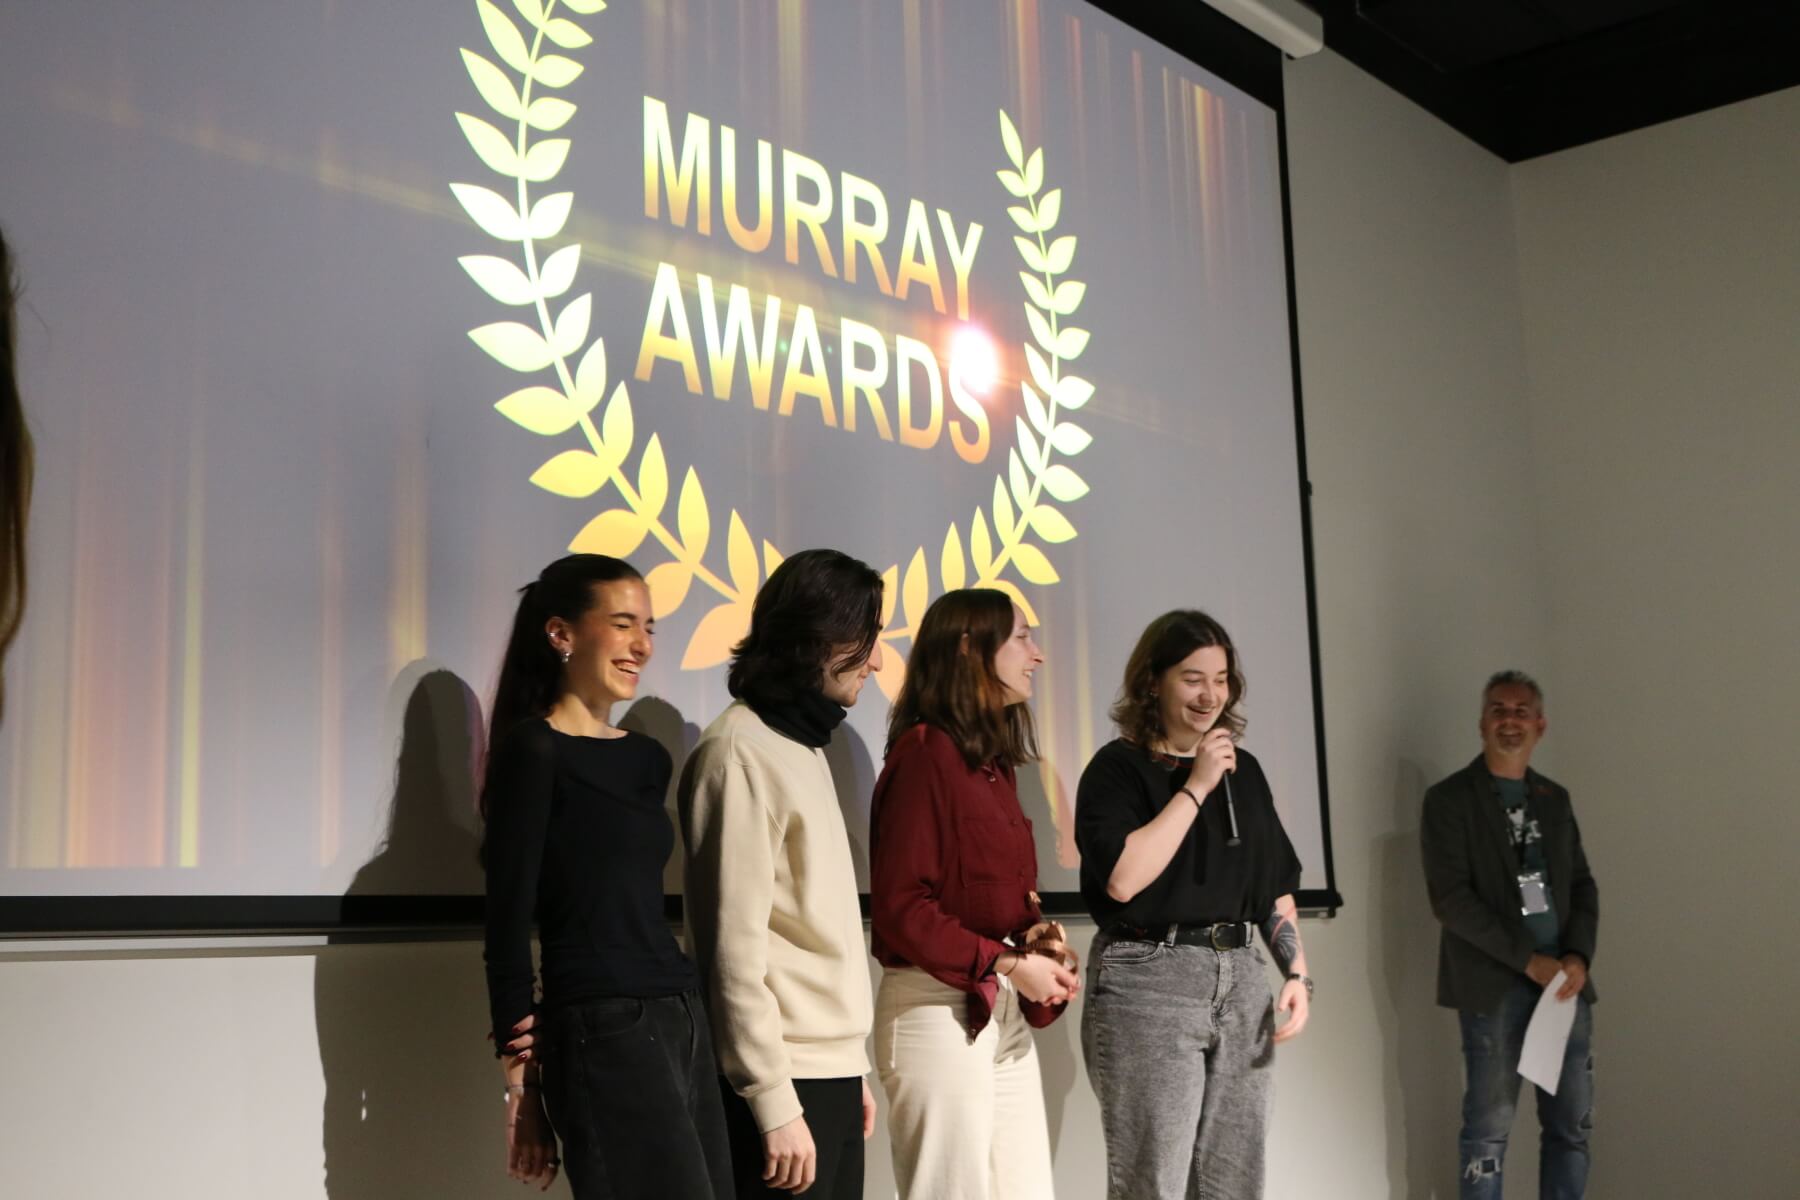 The presenter of the awards show steps aside to allow a student film team a moment to speak after winning an award.